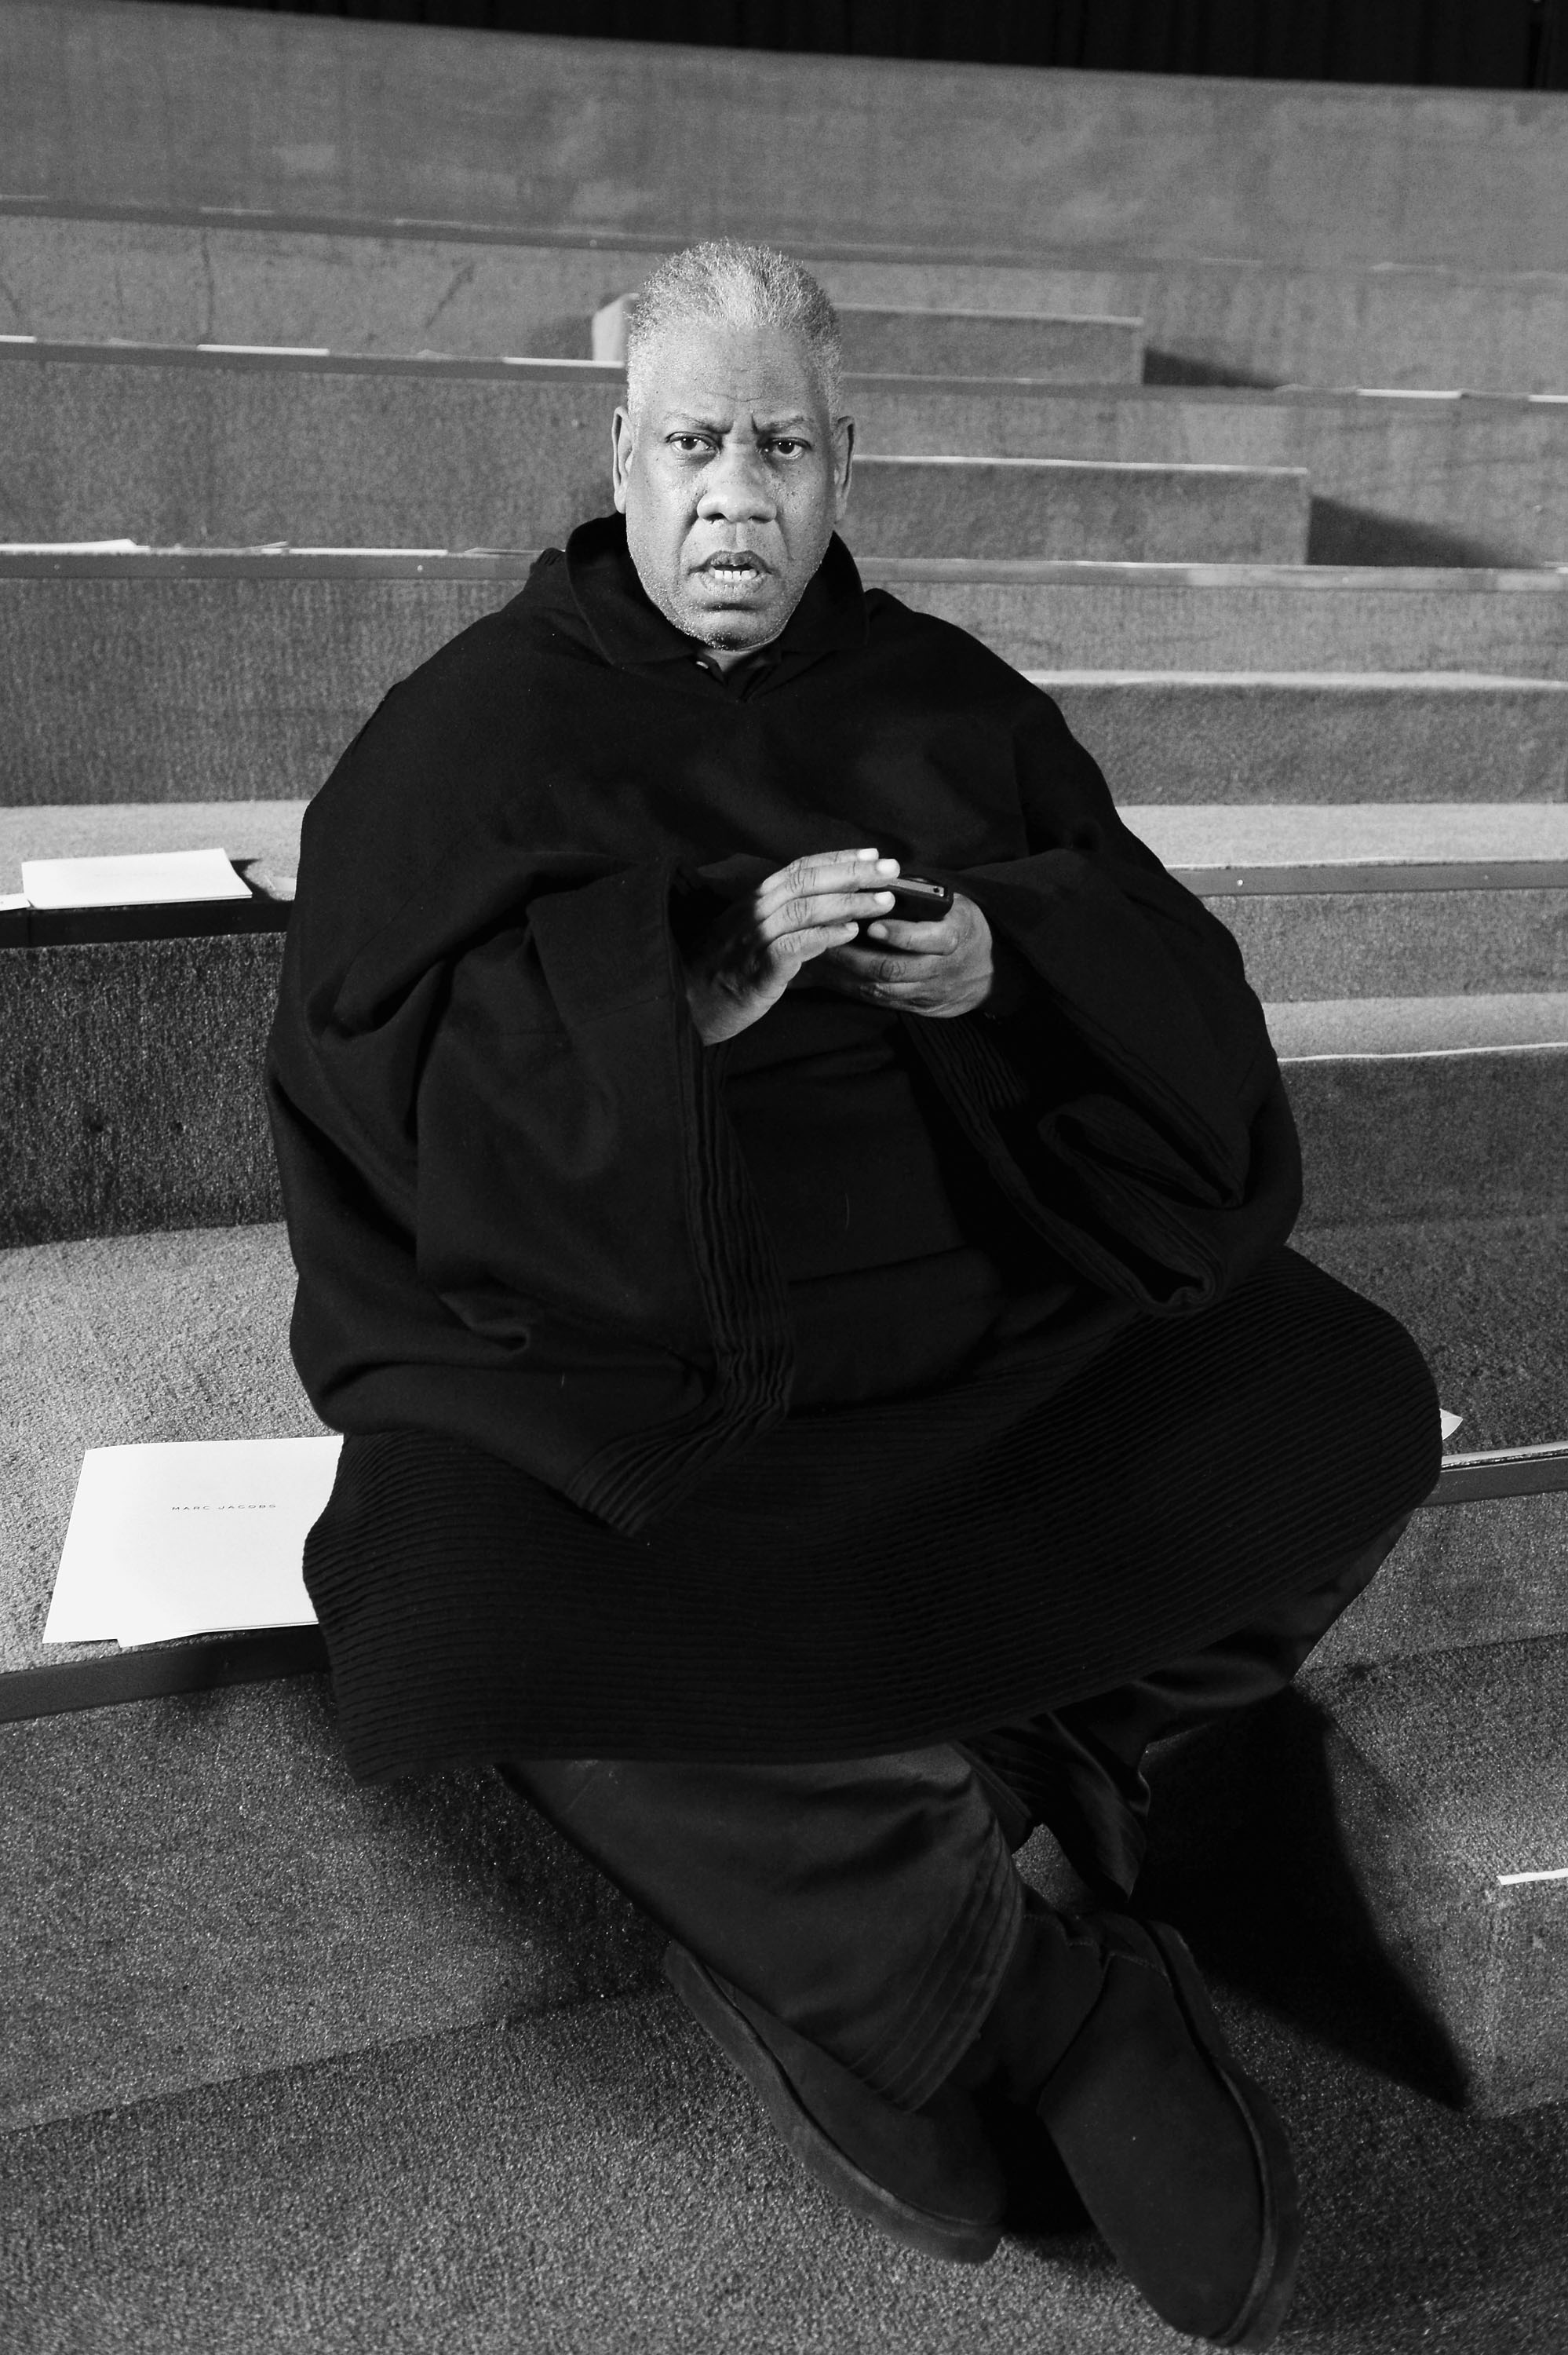 André Leon Talley, the former influential Vogue editor, dies at 73